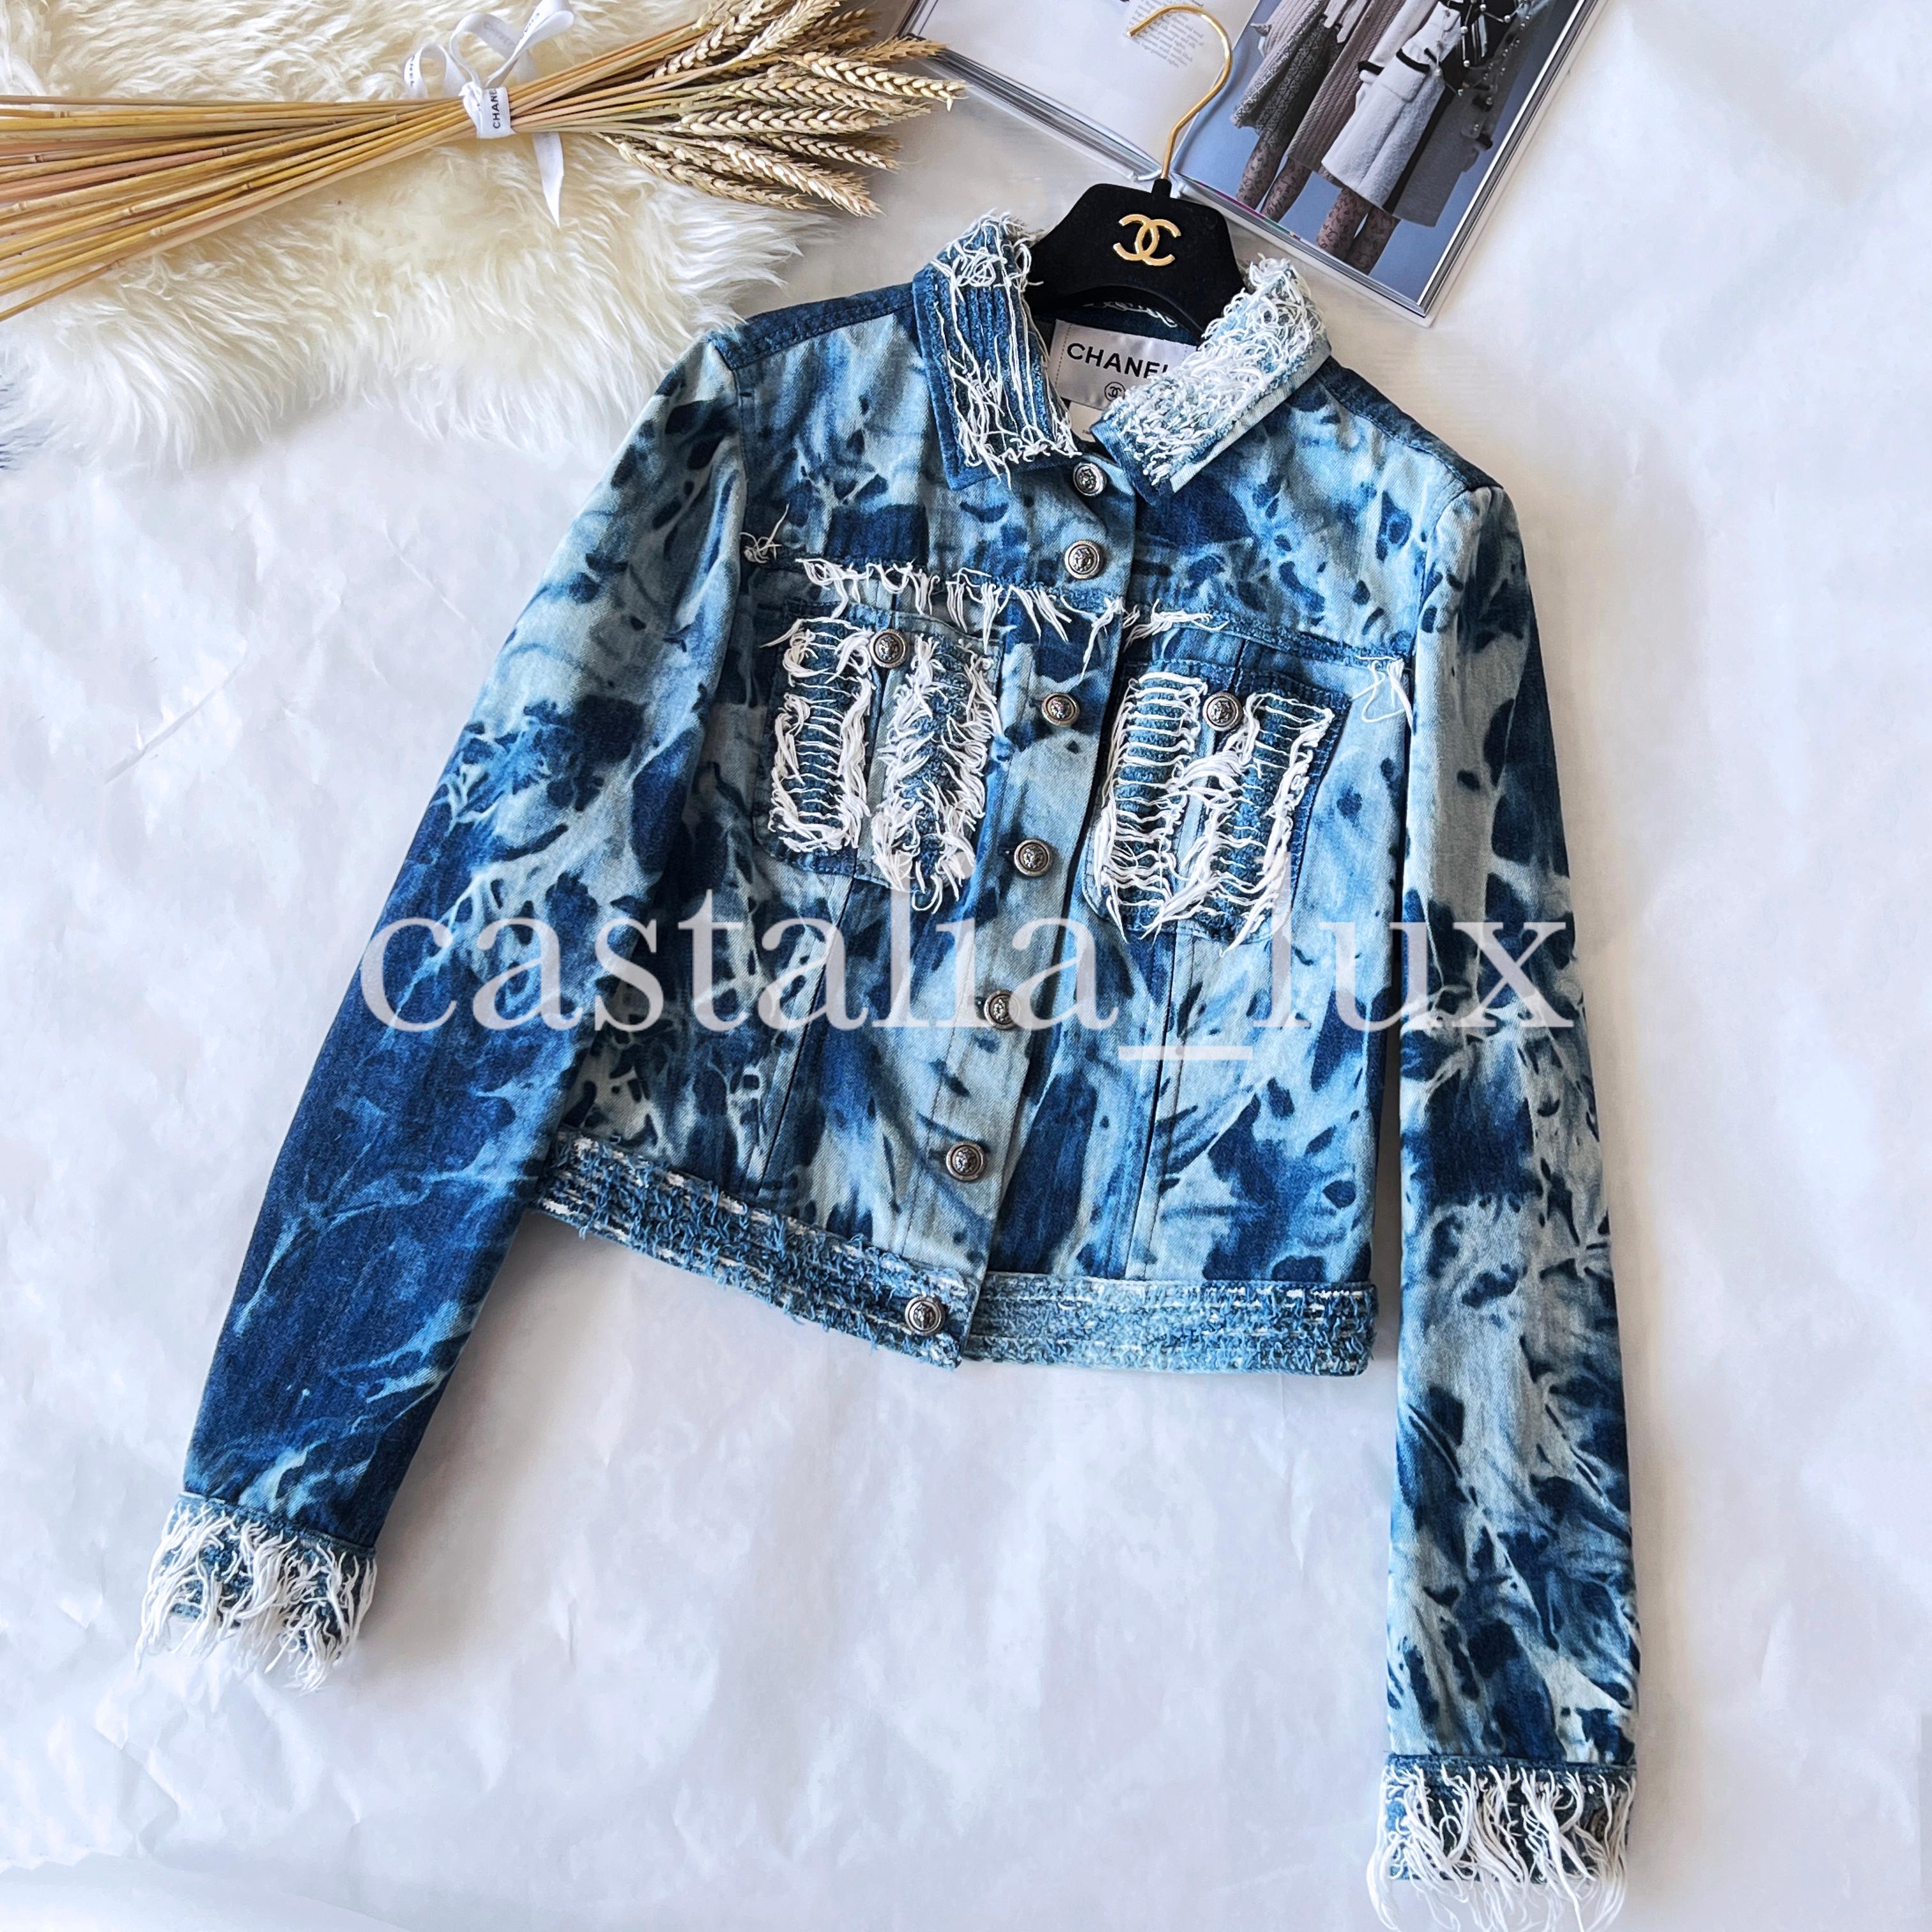 Rarest Chanel blue denim jacket with fringe detail and CC logo lion head buttons. Collectors piece!
Size mark 40 FR. Condition is pristine, no signs of wear.